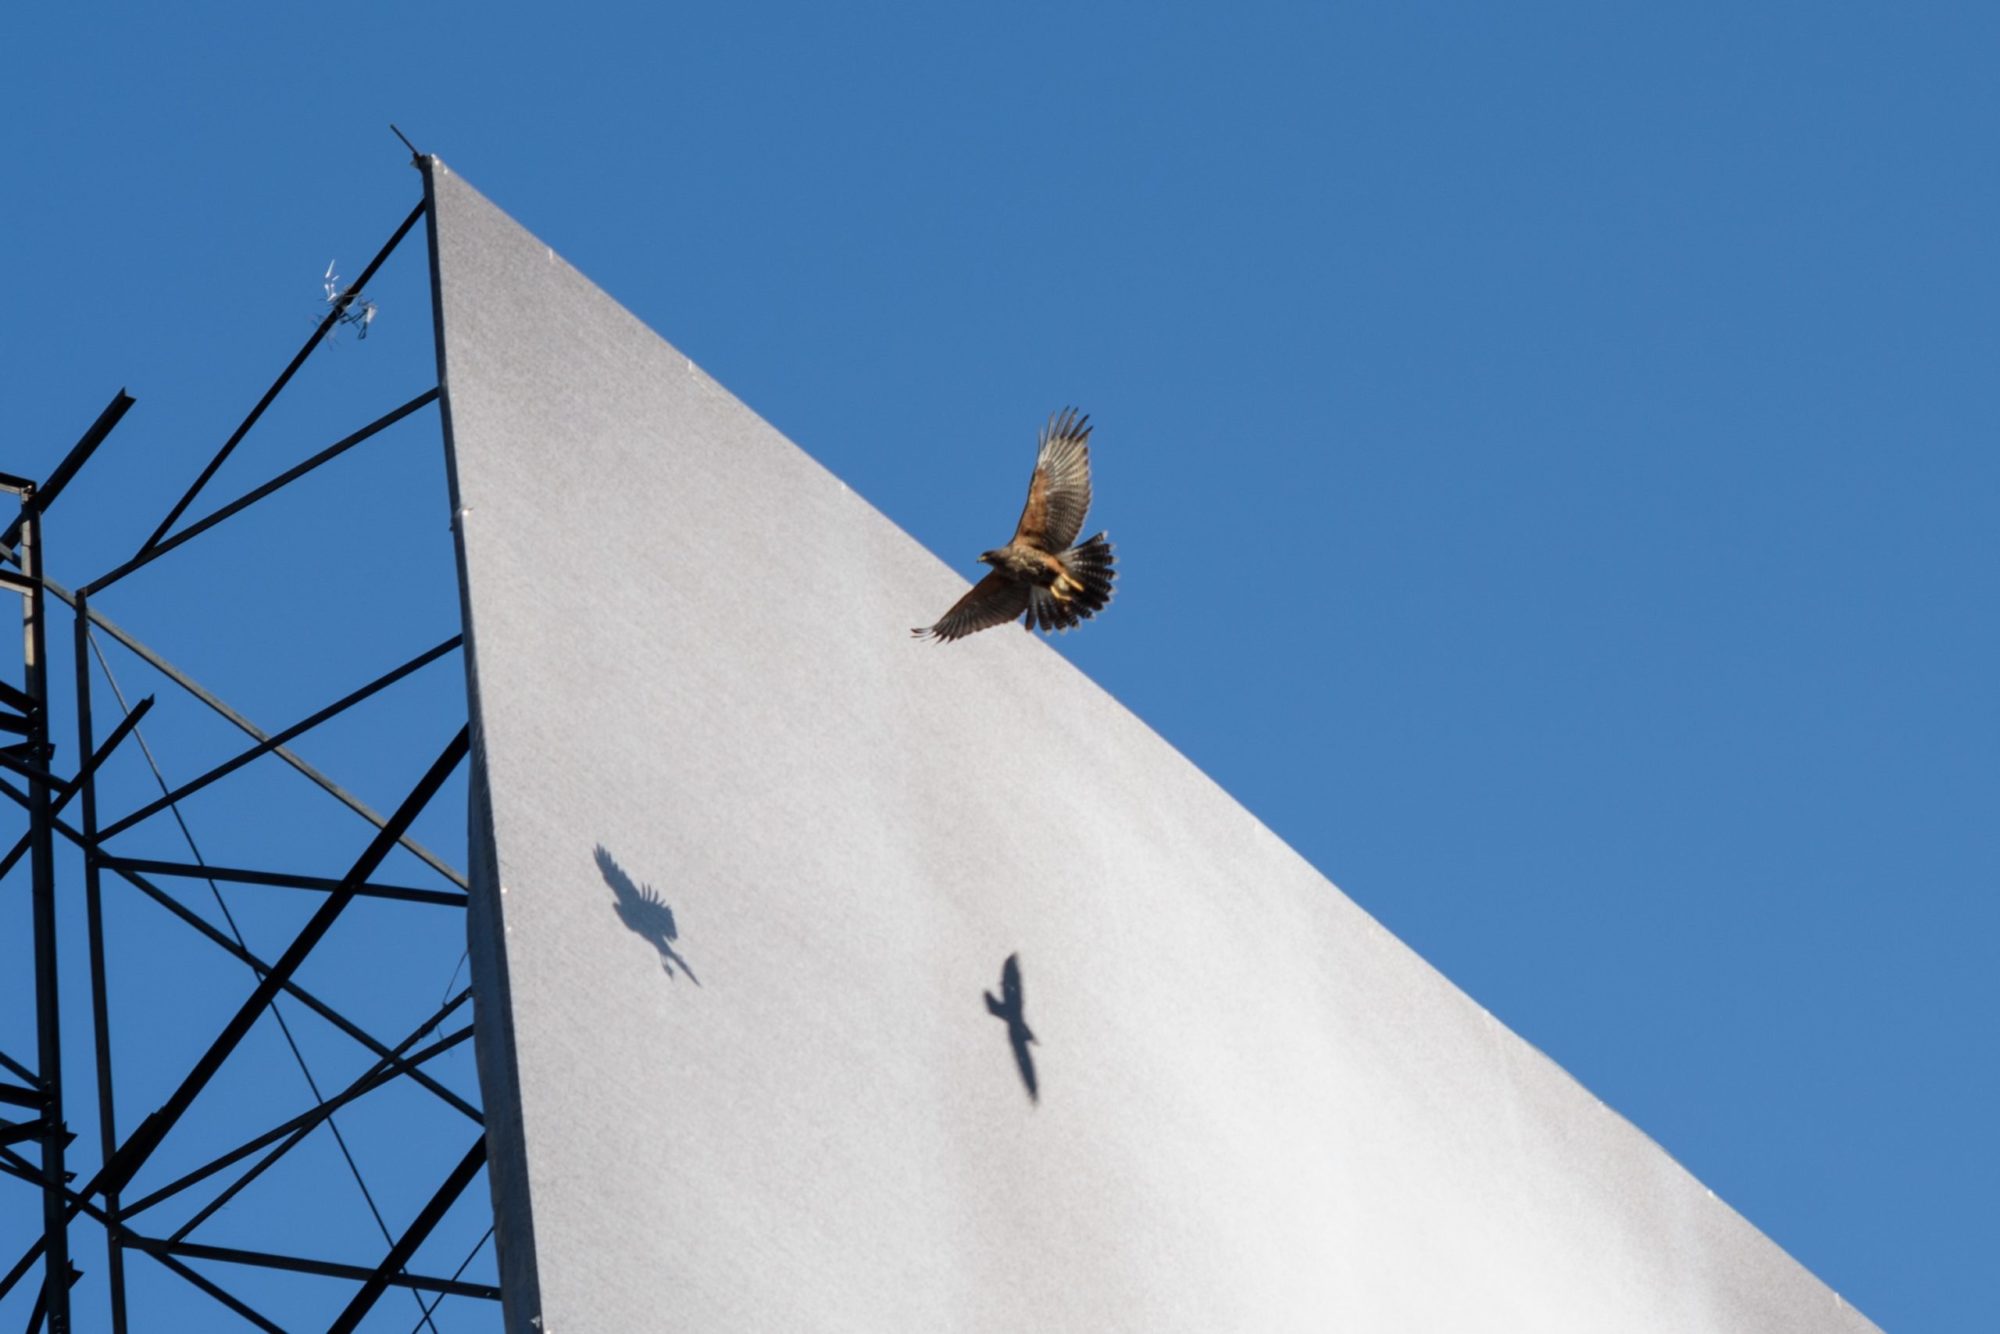 The top left corner of an outdoor white billboard is shown with the harsh shadow of a passing bird (who is also in the image) on the display.